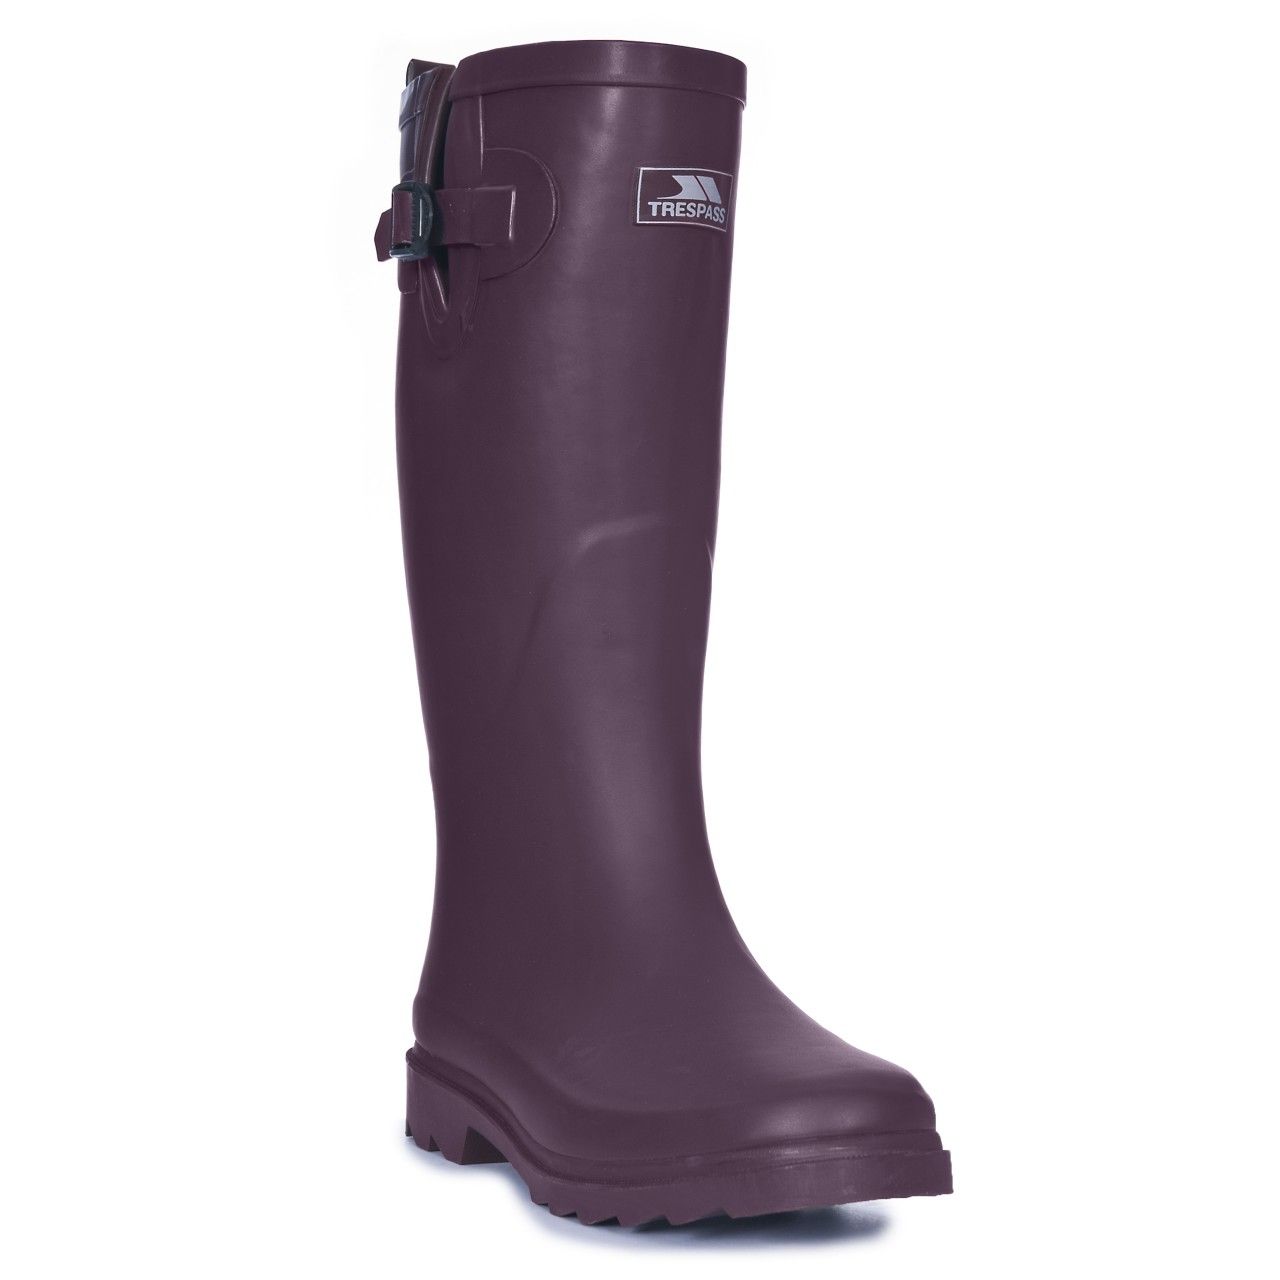 Ladies waterproof wellington boots. Adjustable buckle. Grip sole. High rise build. Outer Material: 100% Rubber, Inner Material: 100% Manmade, Sole: 100% Gum Rubber, Closure: Slip On.